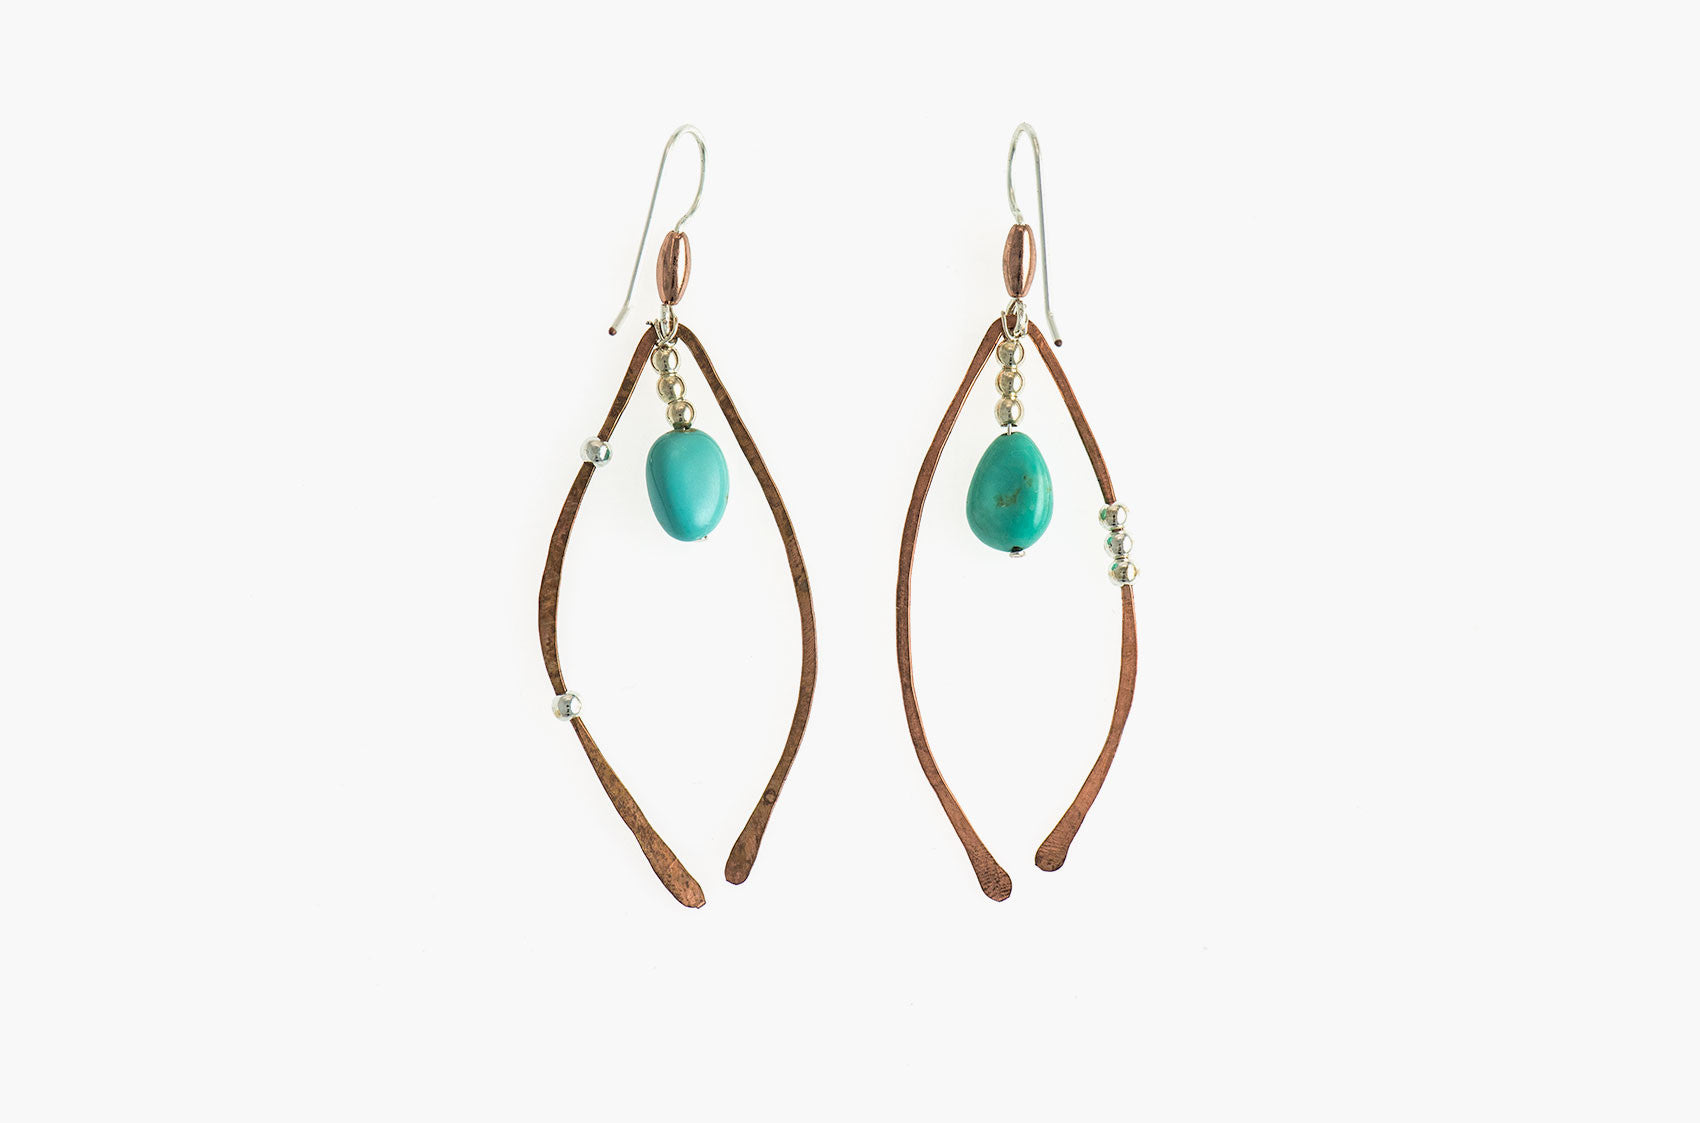 Metal & Stone. Artisan arches earrings Copper/silver earwires